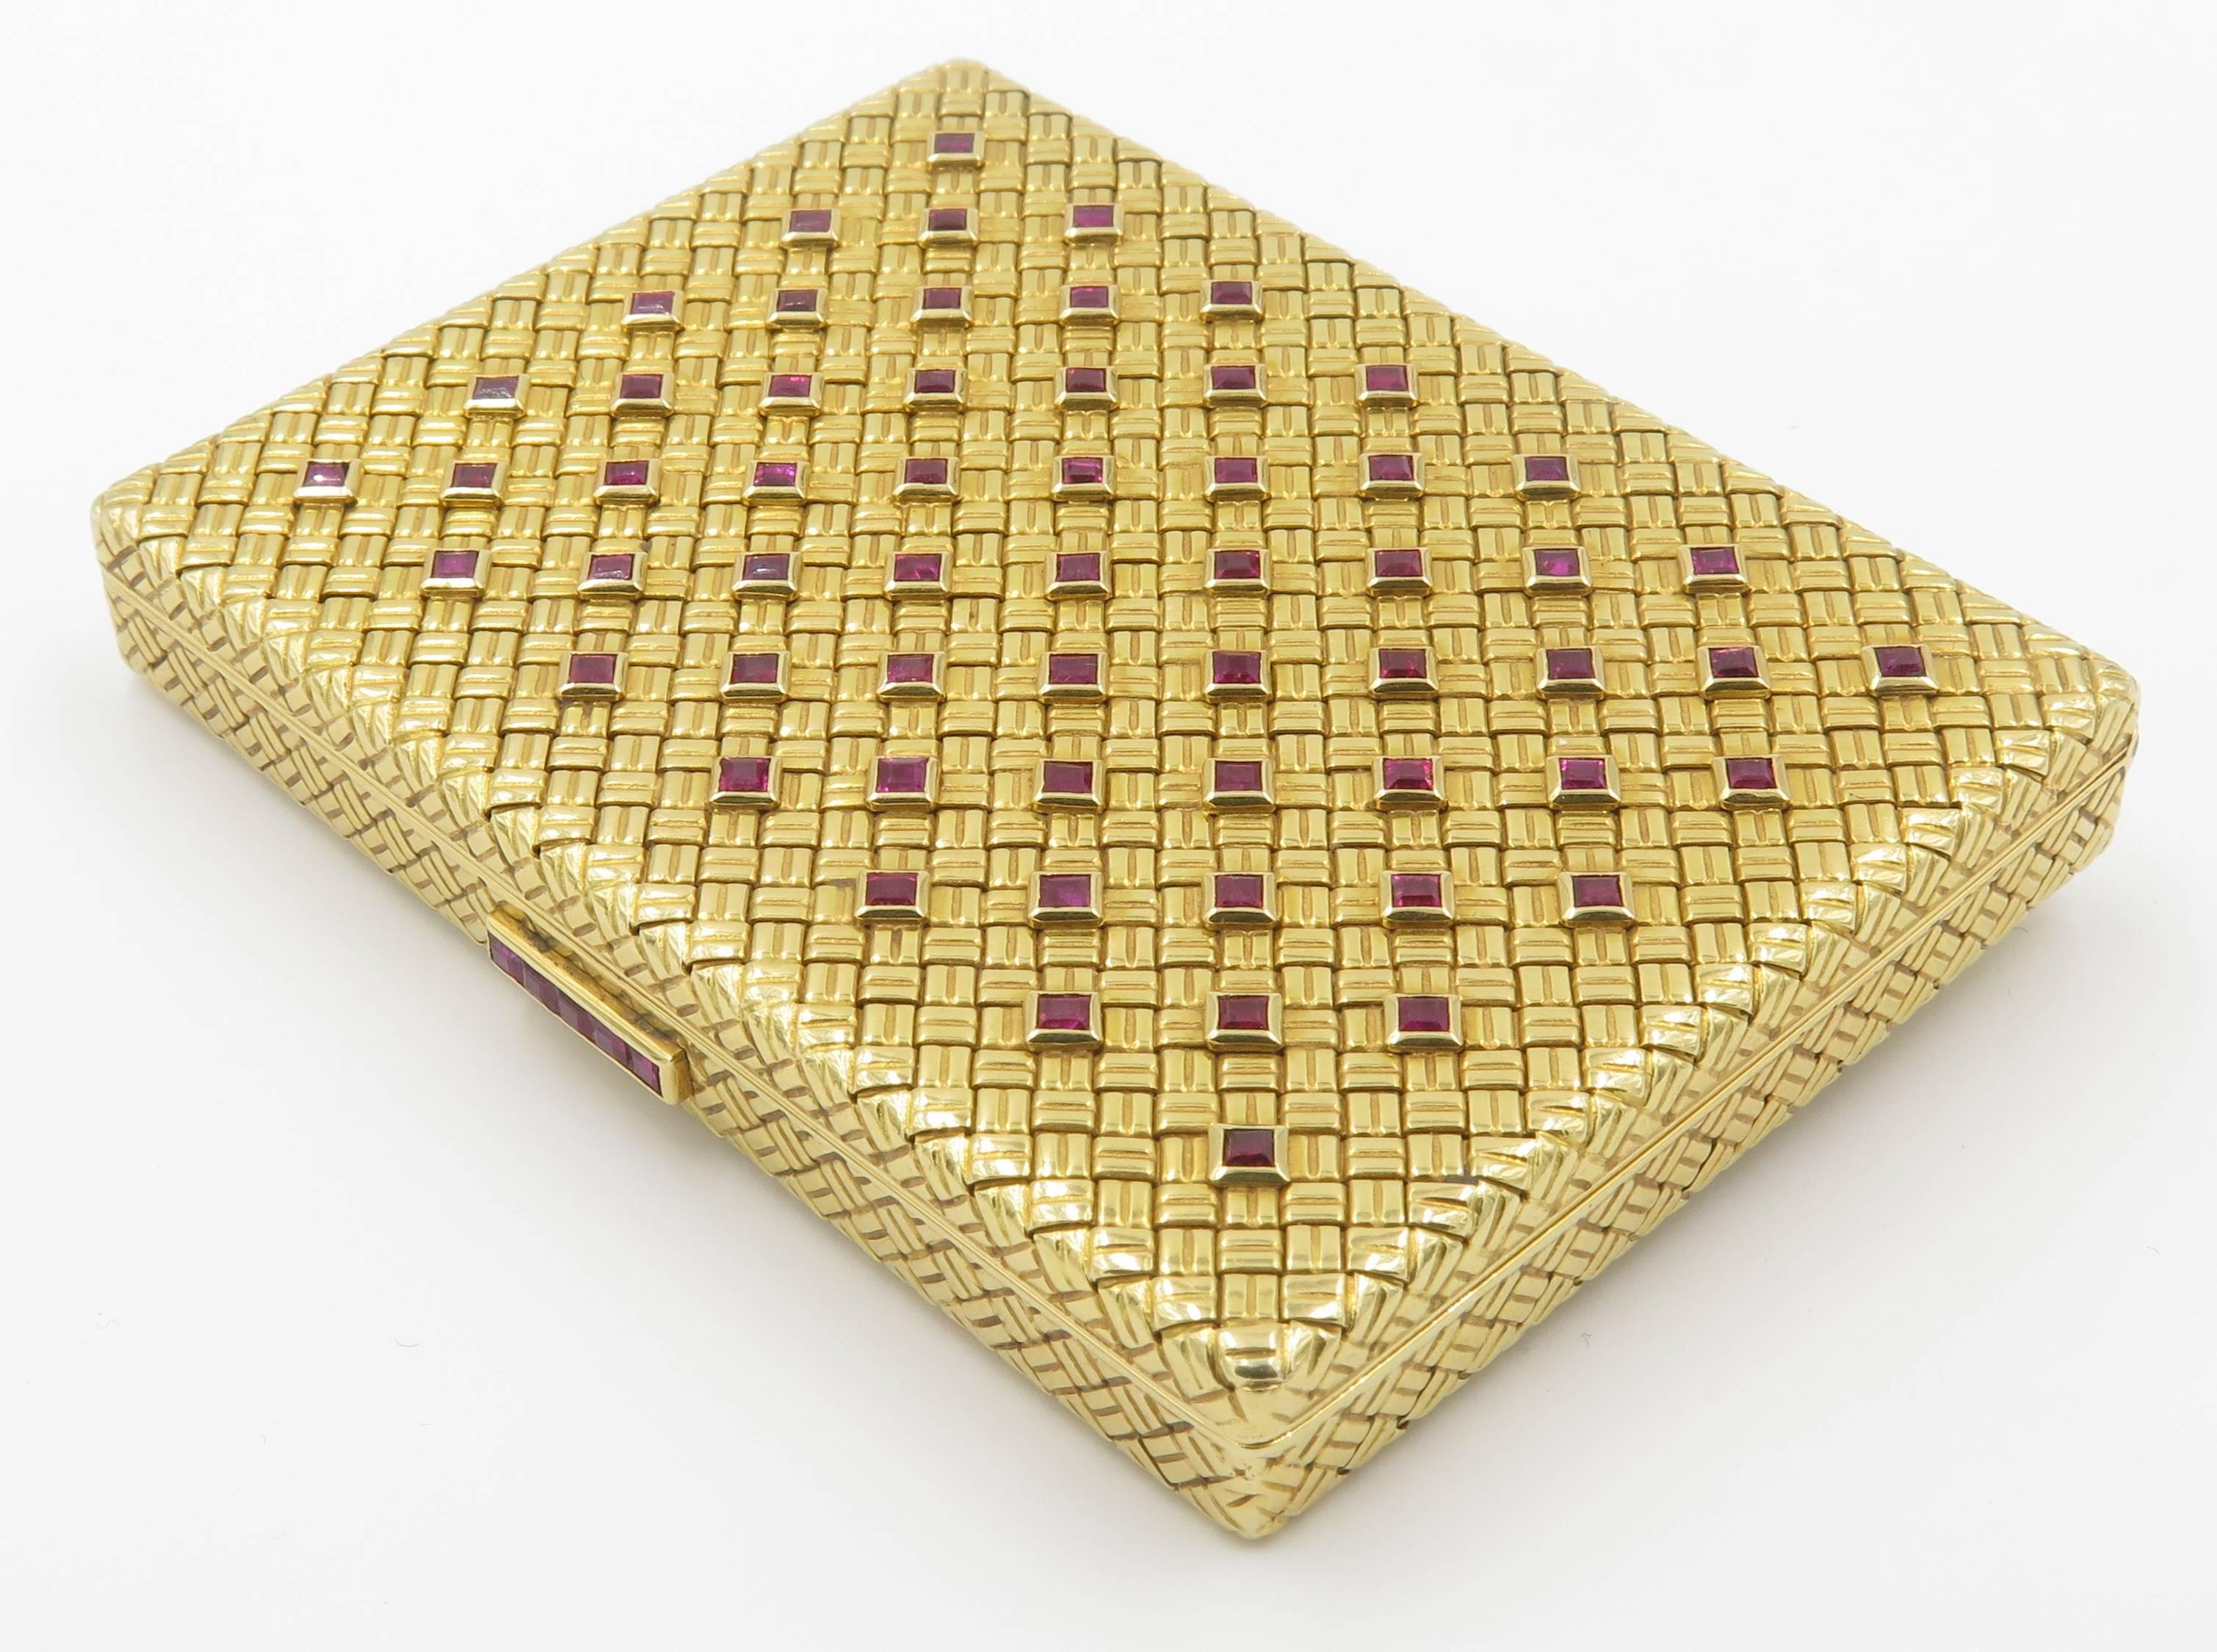 An 18 karat yellow gold and ruby compact, Van Cleef & Arpels, Circa late 1950's.  The rectangular case of basket weave design, enhanced by square-cut rubies. Opening to reveal a mirror and powder compartment. Measures 3 x 2 1/4 x 3/8 inches. Gross